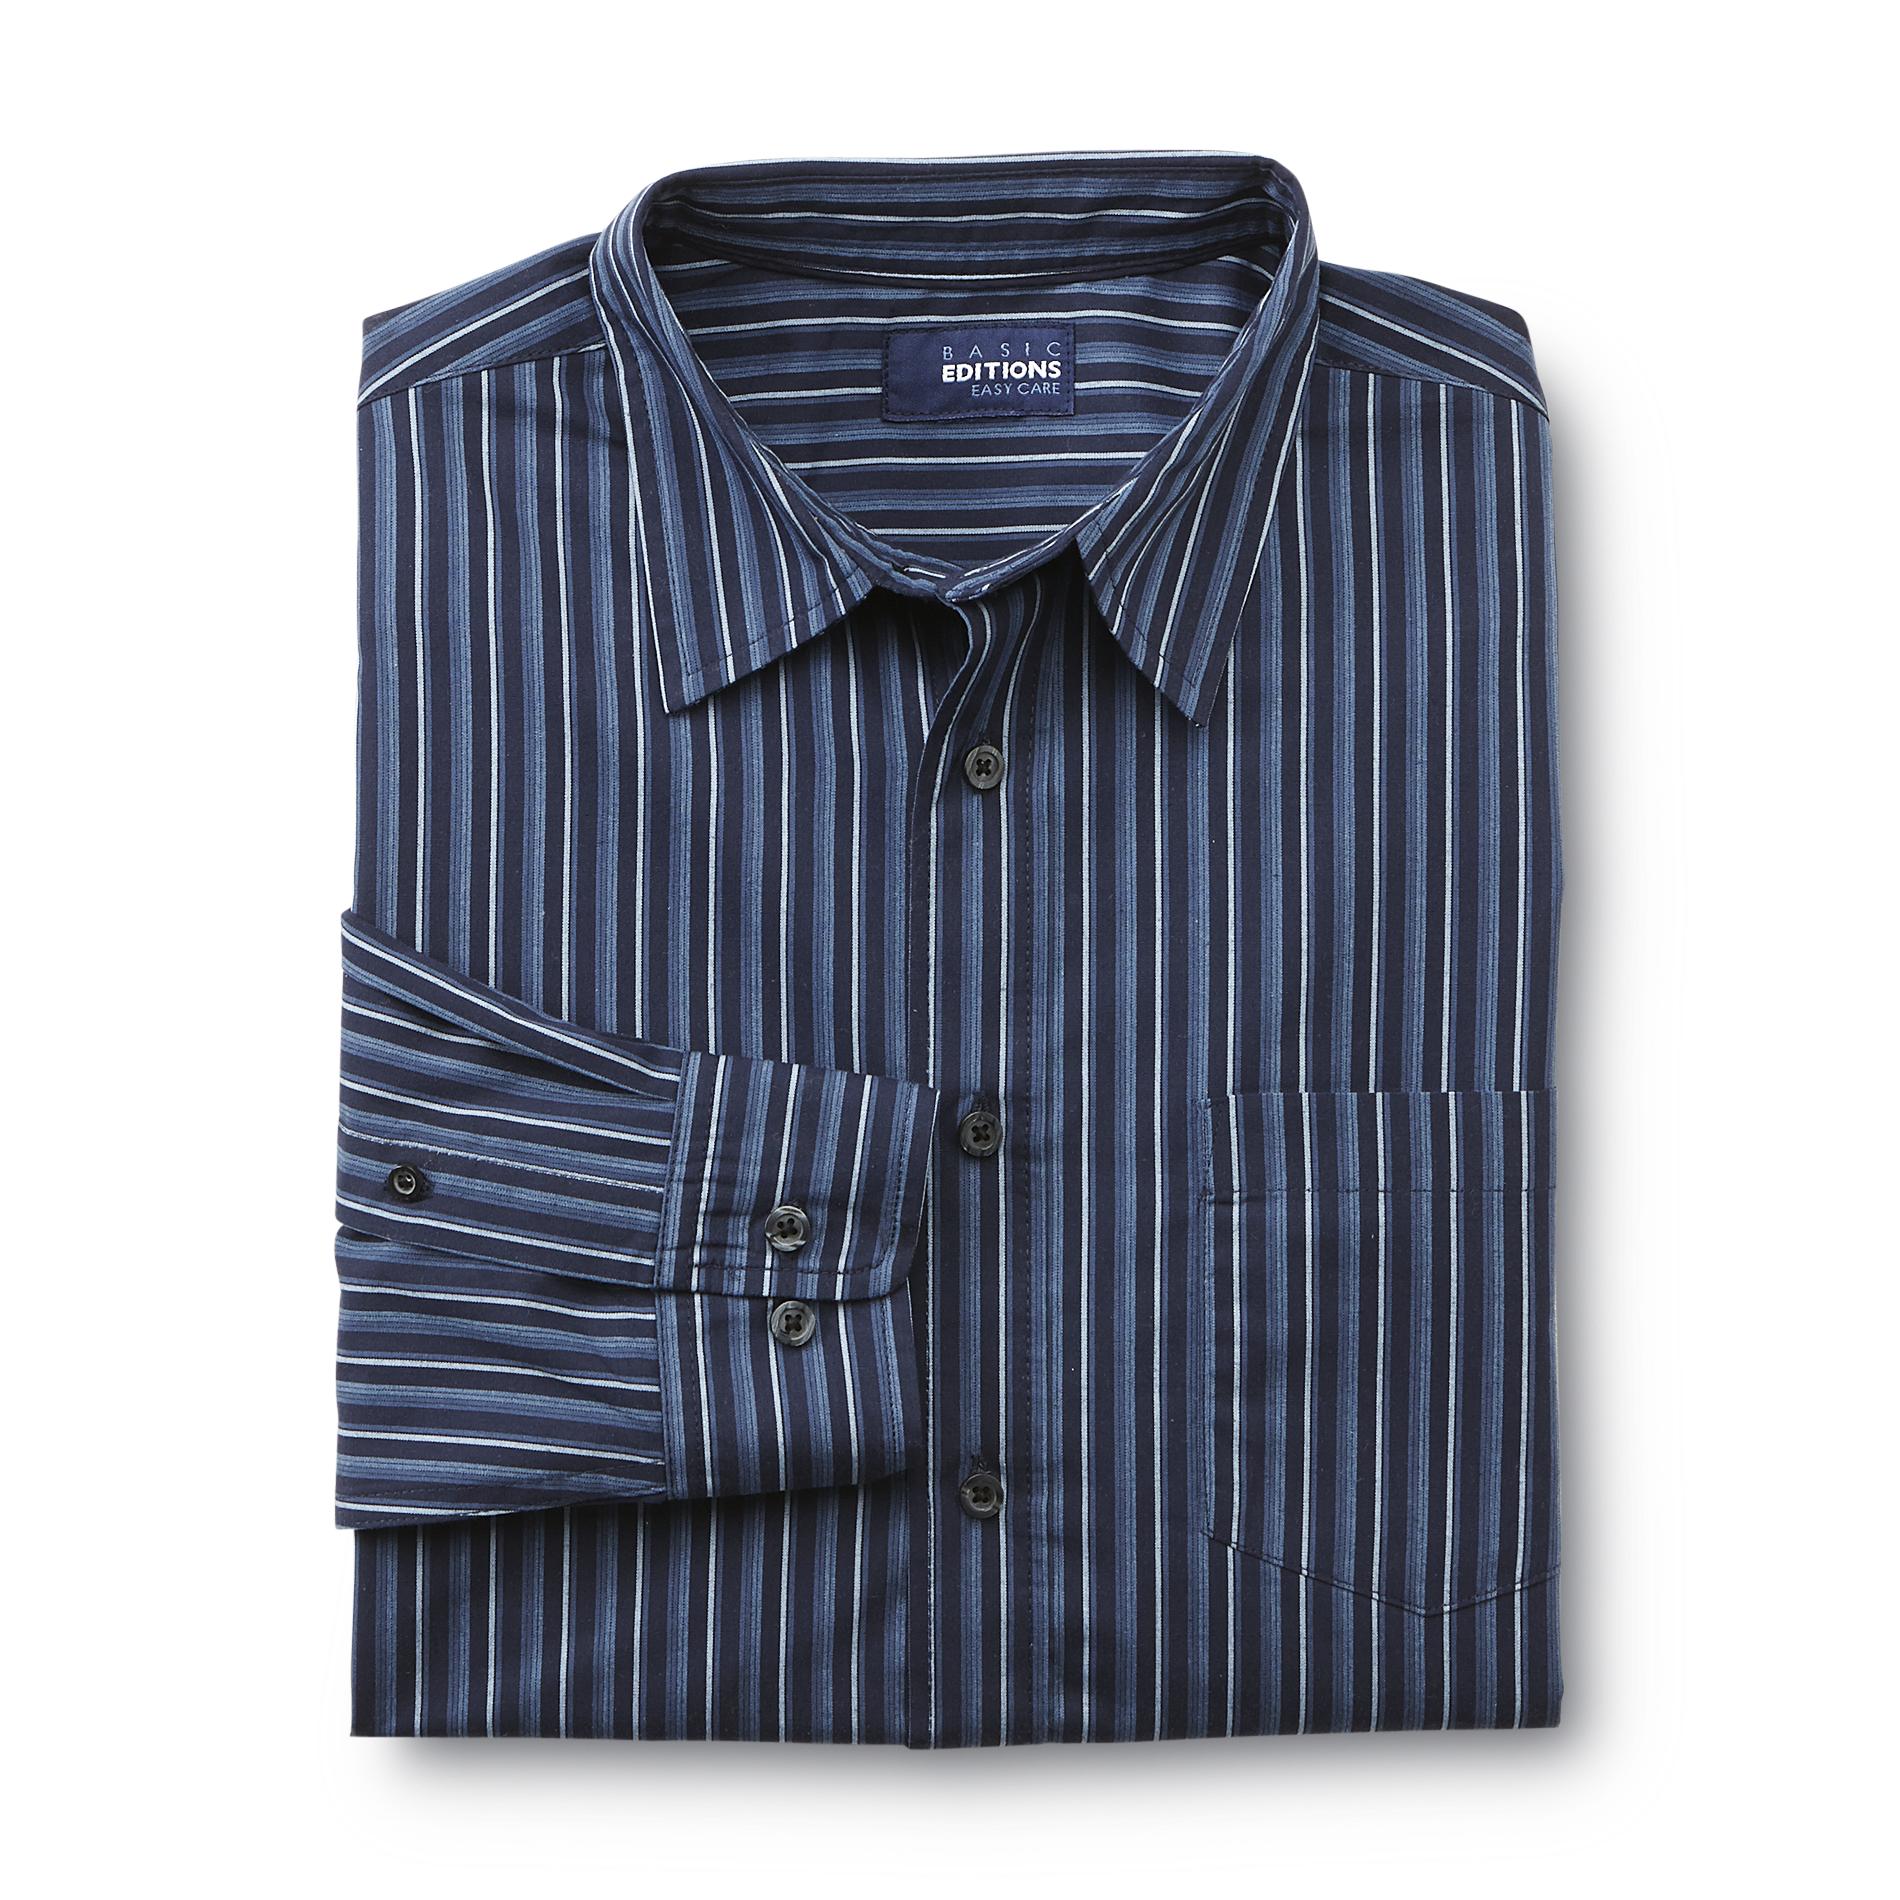 Basic Editions Men's Easy Care Dress Shirt - Striped